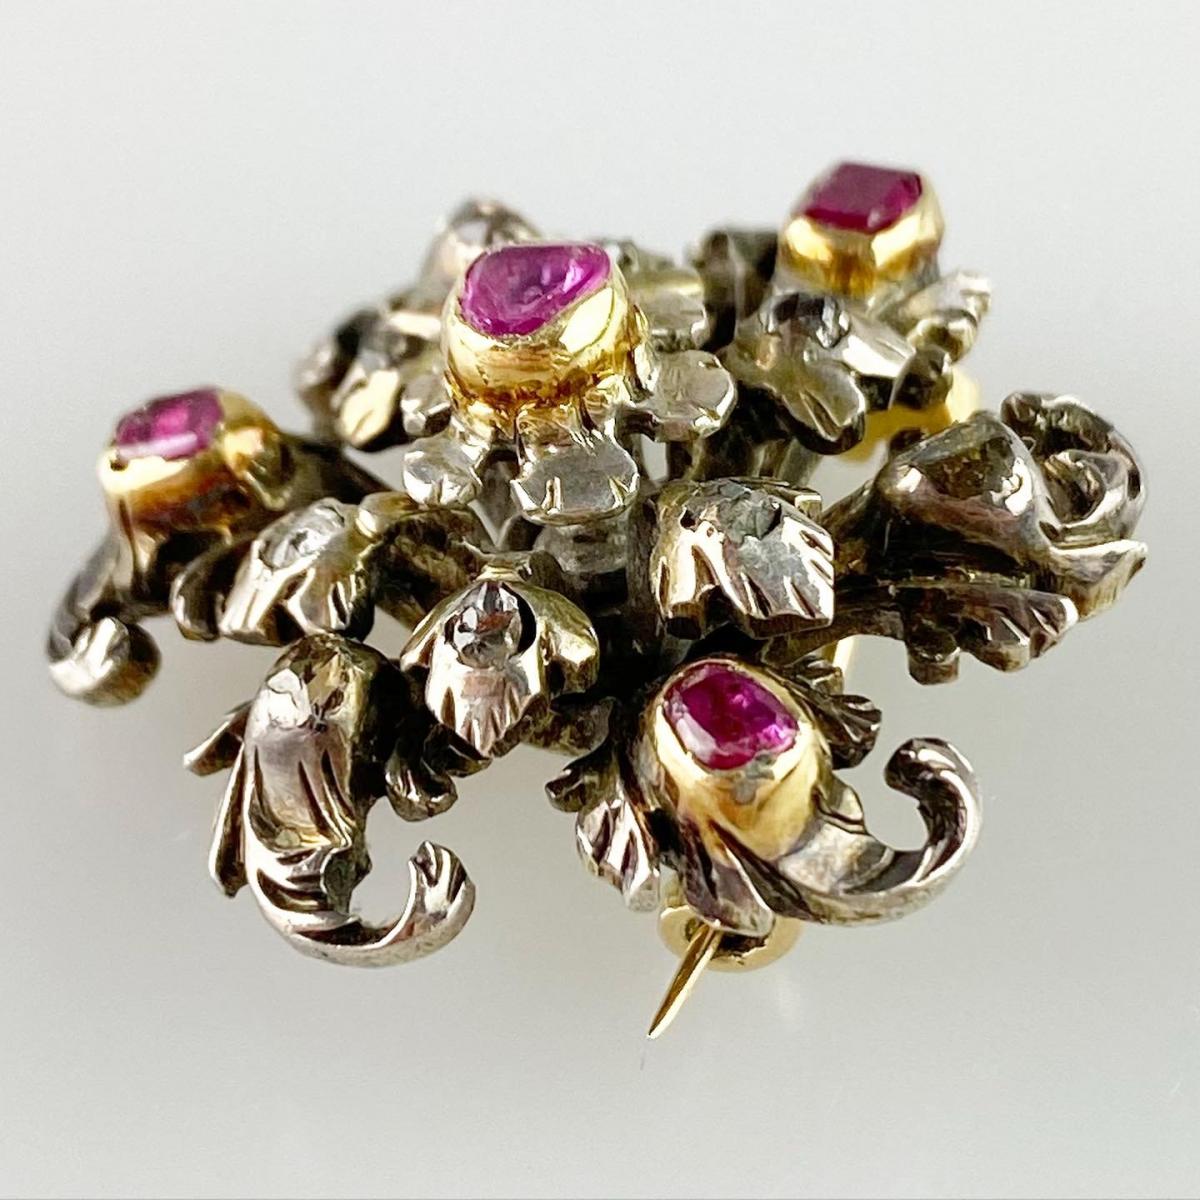 Flower brooch with diamonds & rubies. Spanish, late 17th / early 18th century